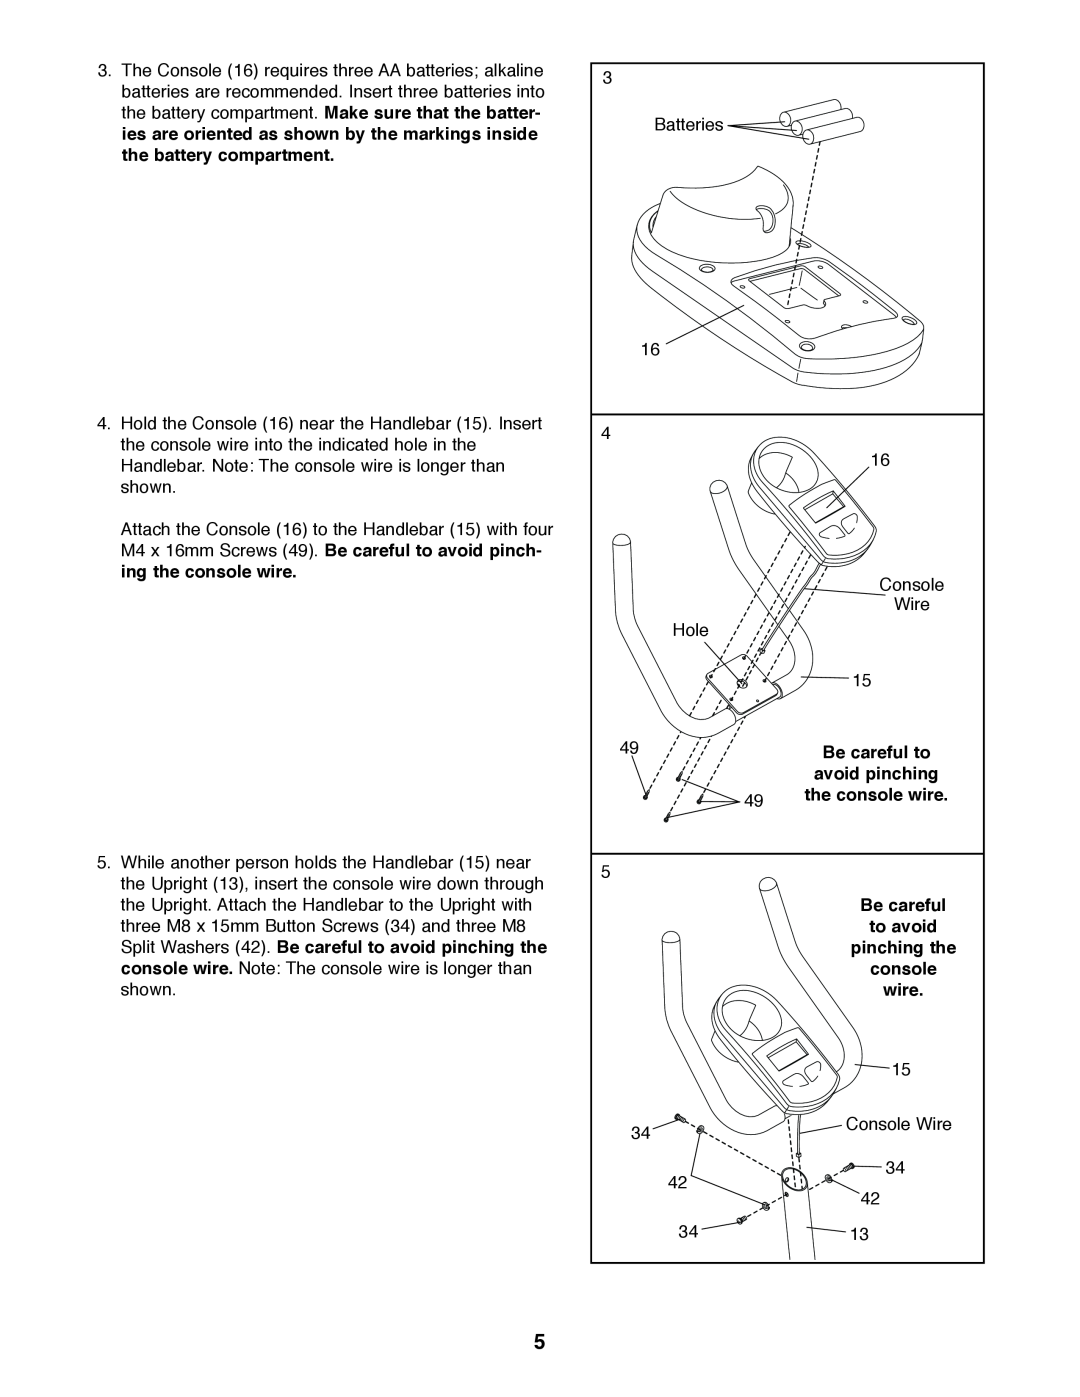 Weslo WLEX14820 user manual Be careful to, avoid pinching, to avoid, pinching the, console 